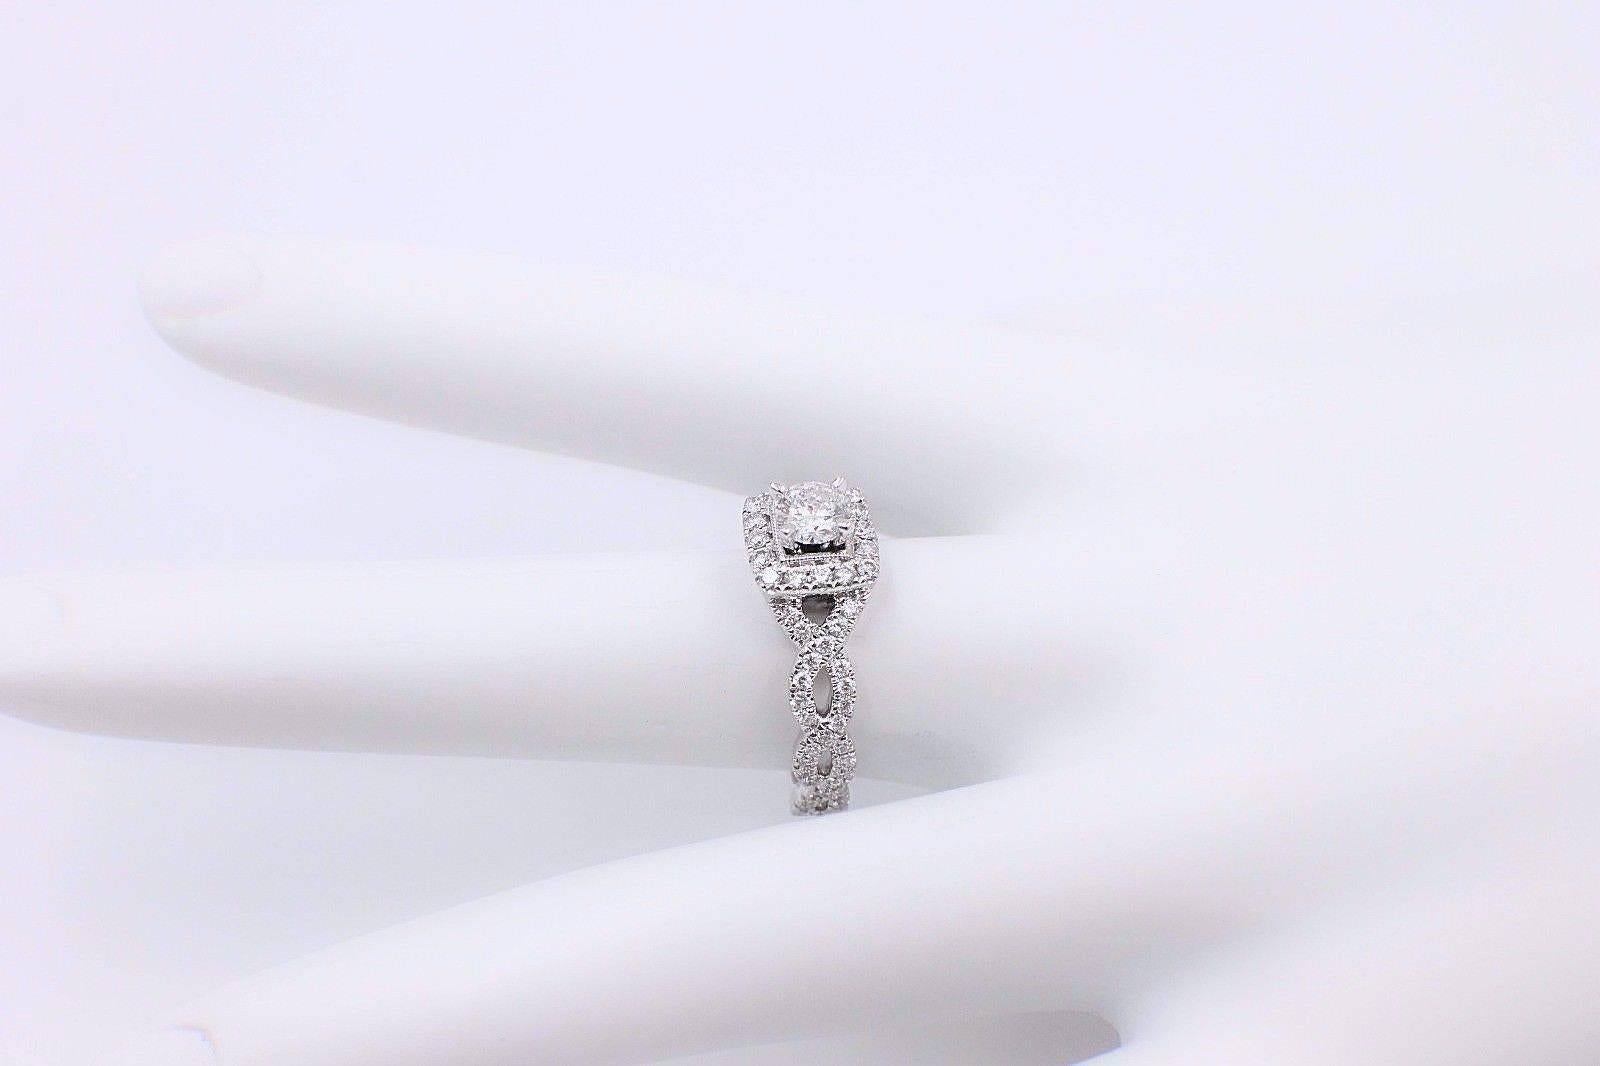 Neil Lane Bridal 1.00 Carat Round Diamond Twisted Ring 14 Karat White Gold In Excellent Condition For Sale In San Diego, CA